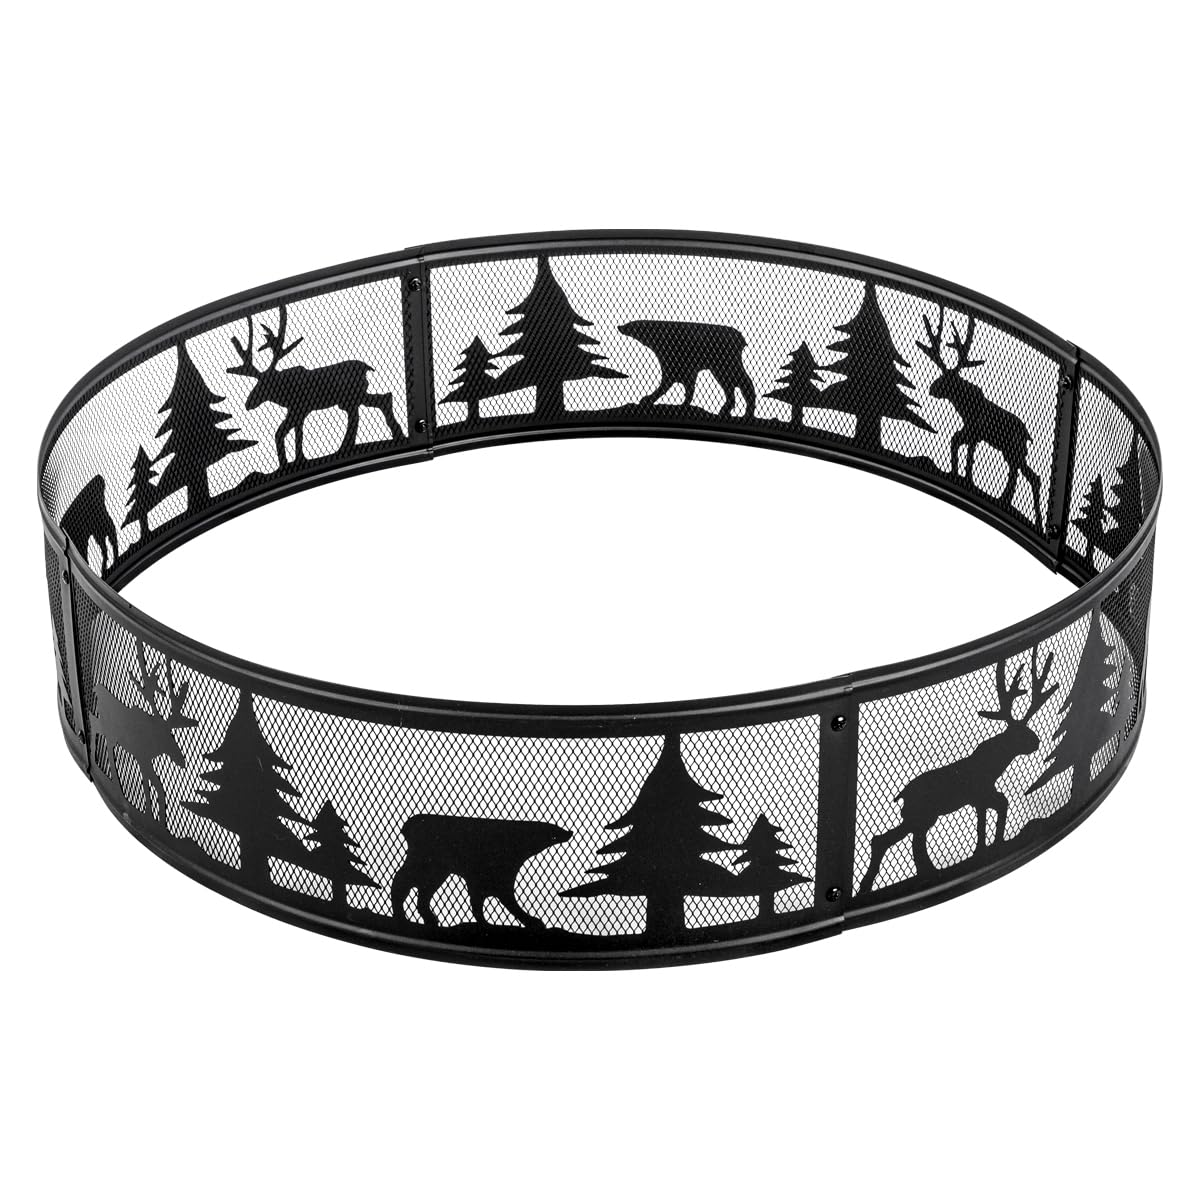 36 Inch Fire Ring with Forest and Animals Design 360° Carving,Portable Steel Fire Rings for Outdoor Camping Bonfire Beaches Park Patio Backyard